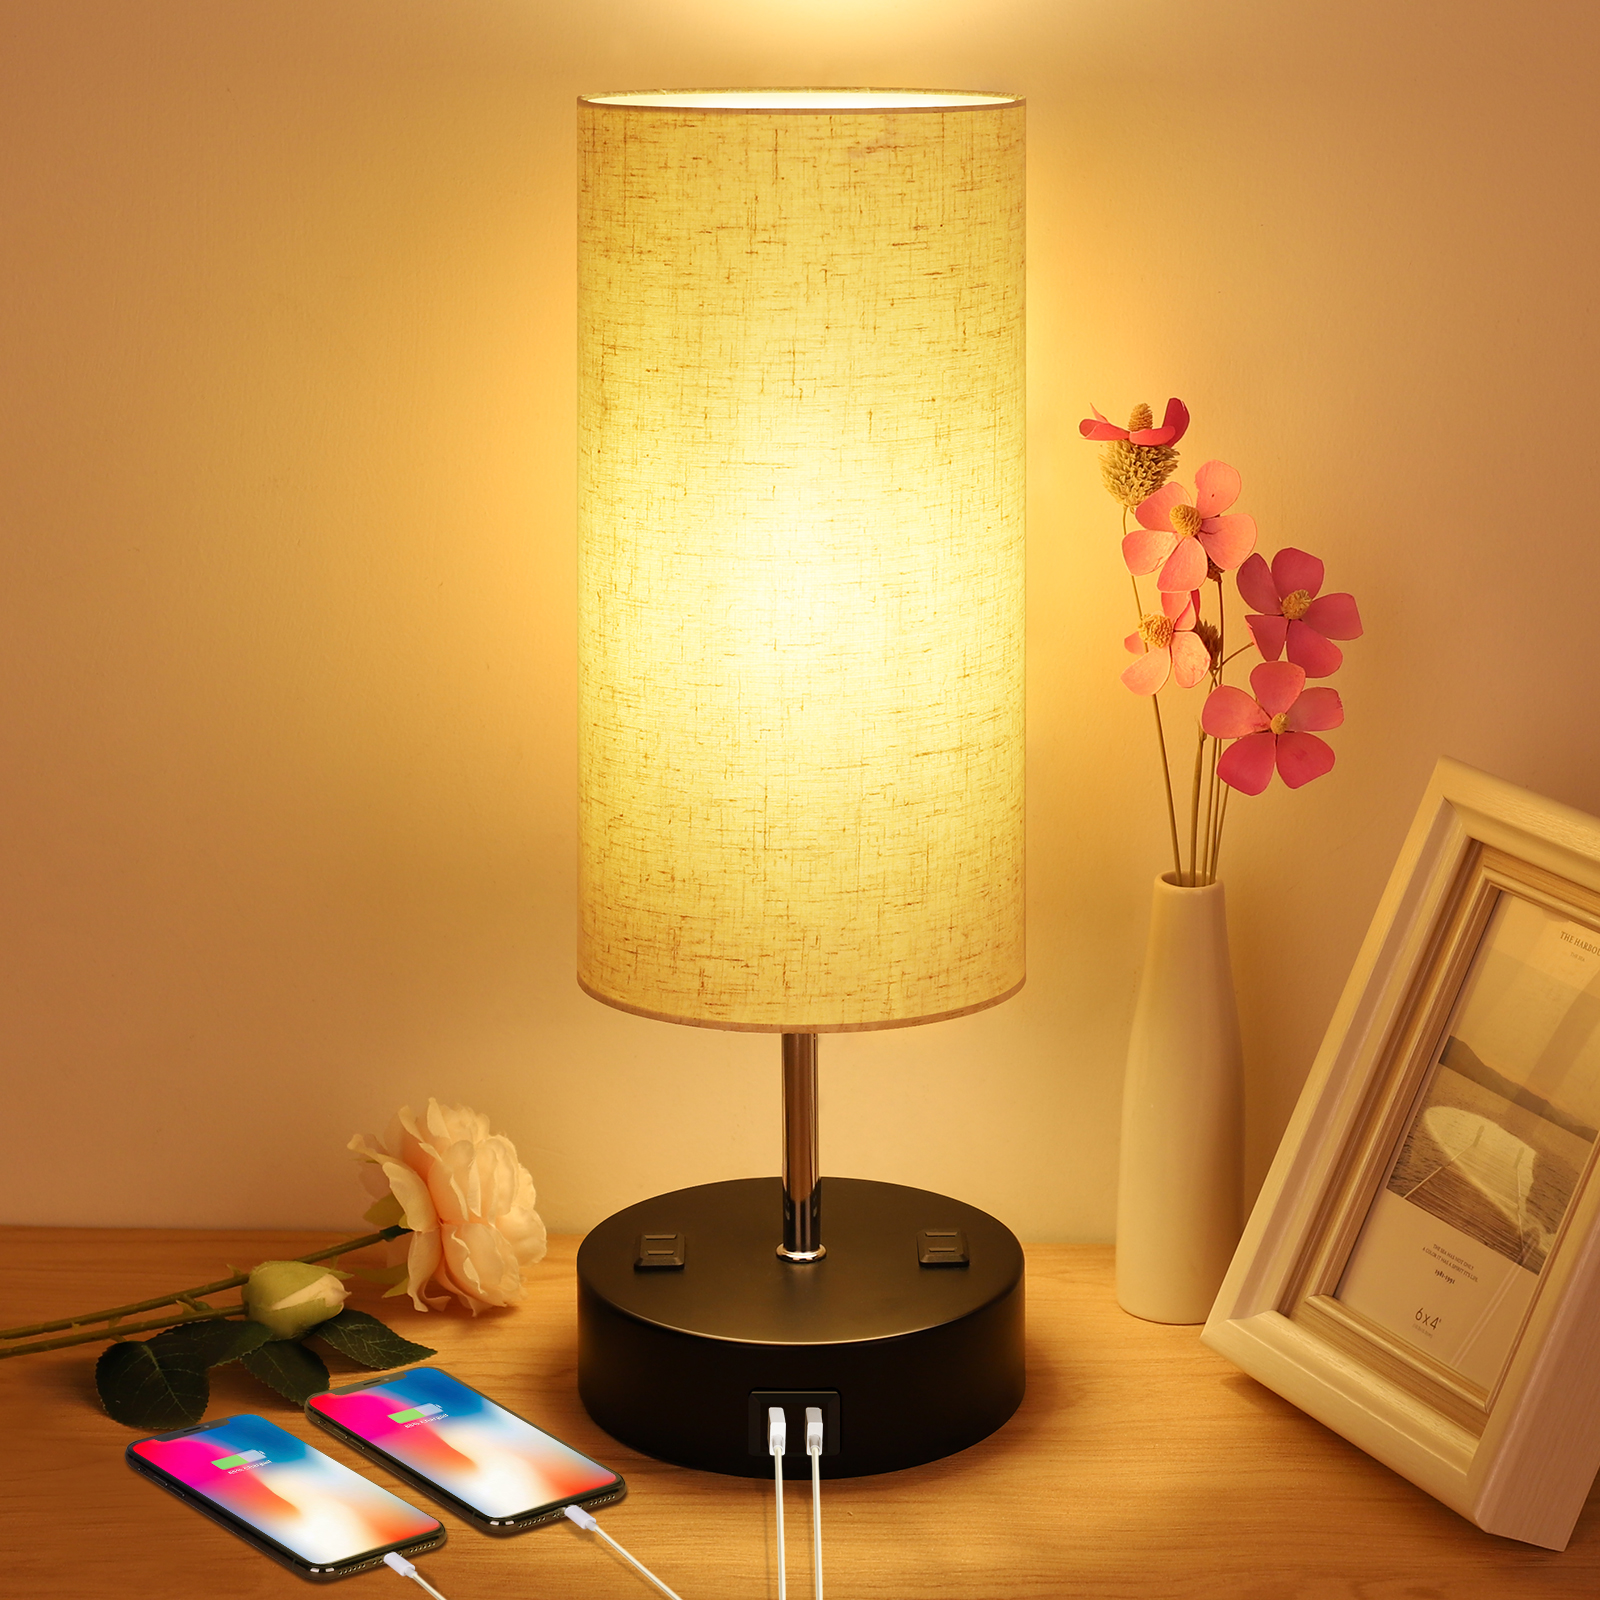 Touch Control Table Lamp, 3 Way Dimmable Touch Lamp Bedside Lamp 